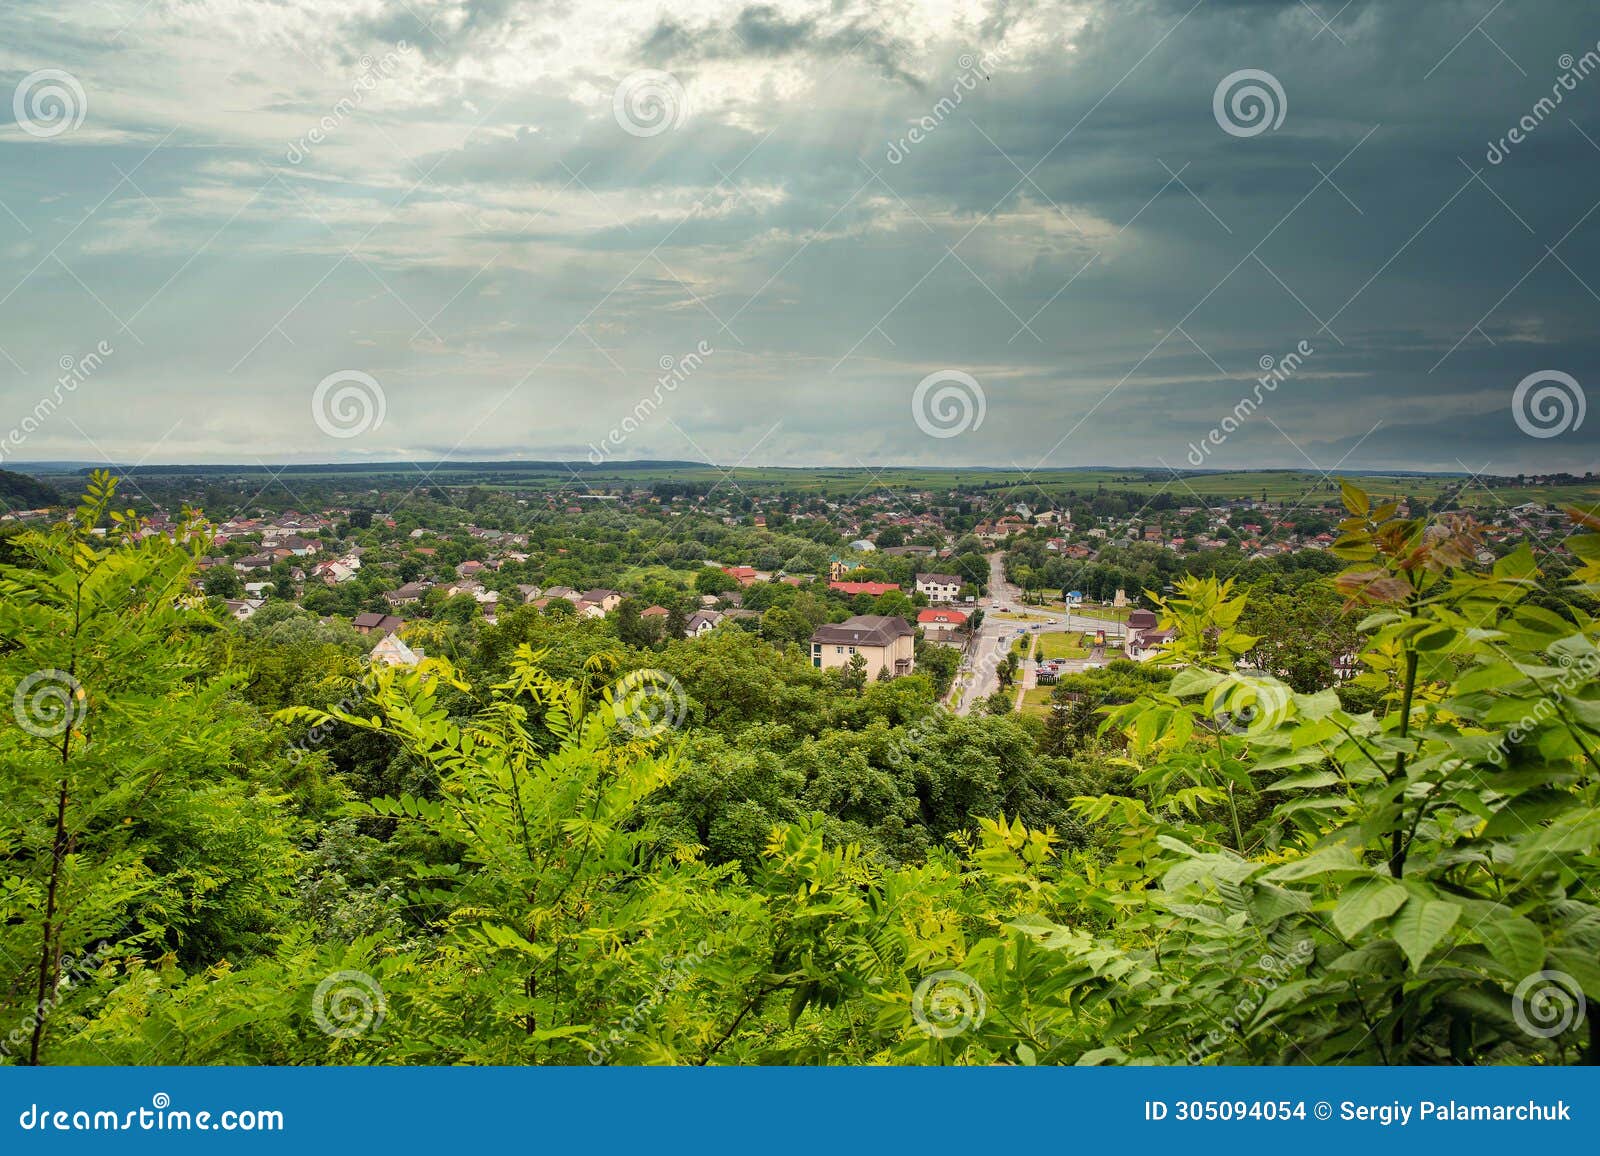 halych townscape from castle hill, ukraine